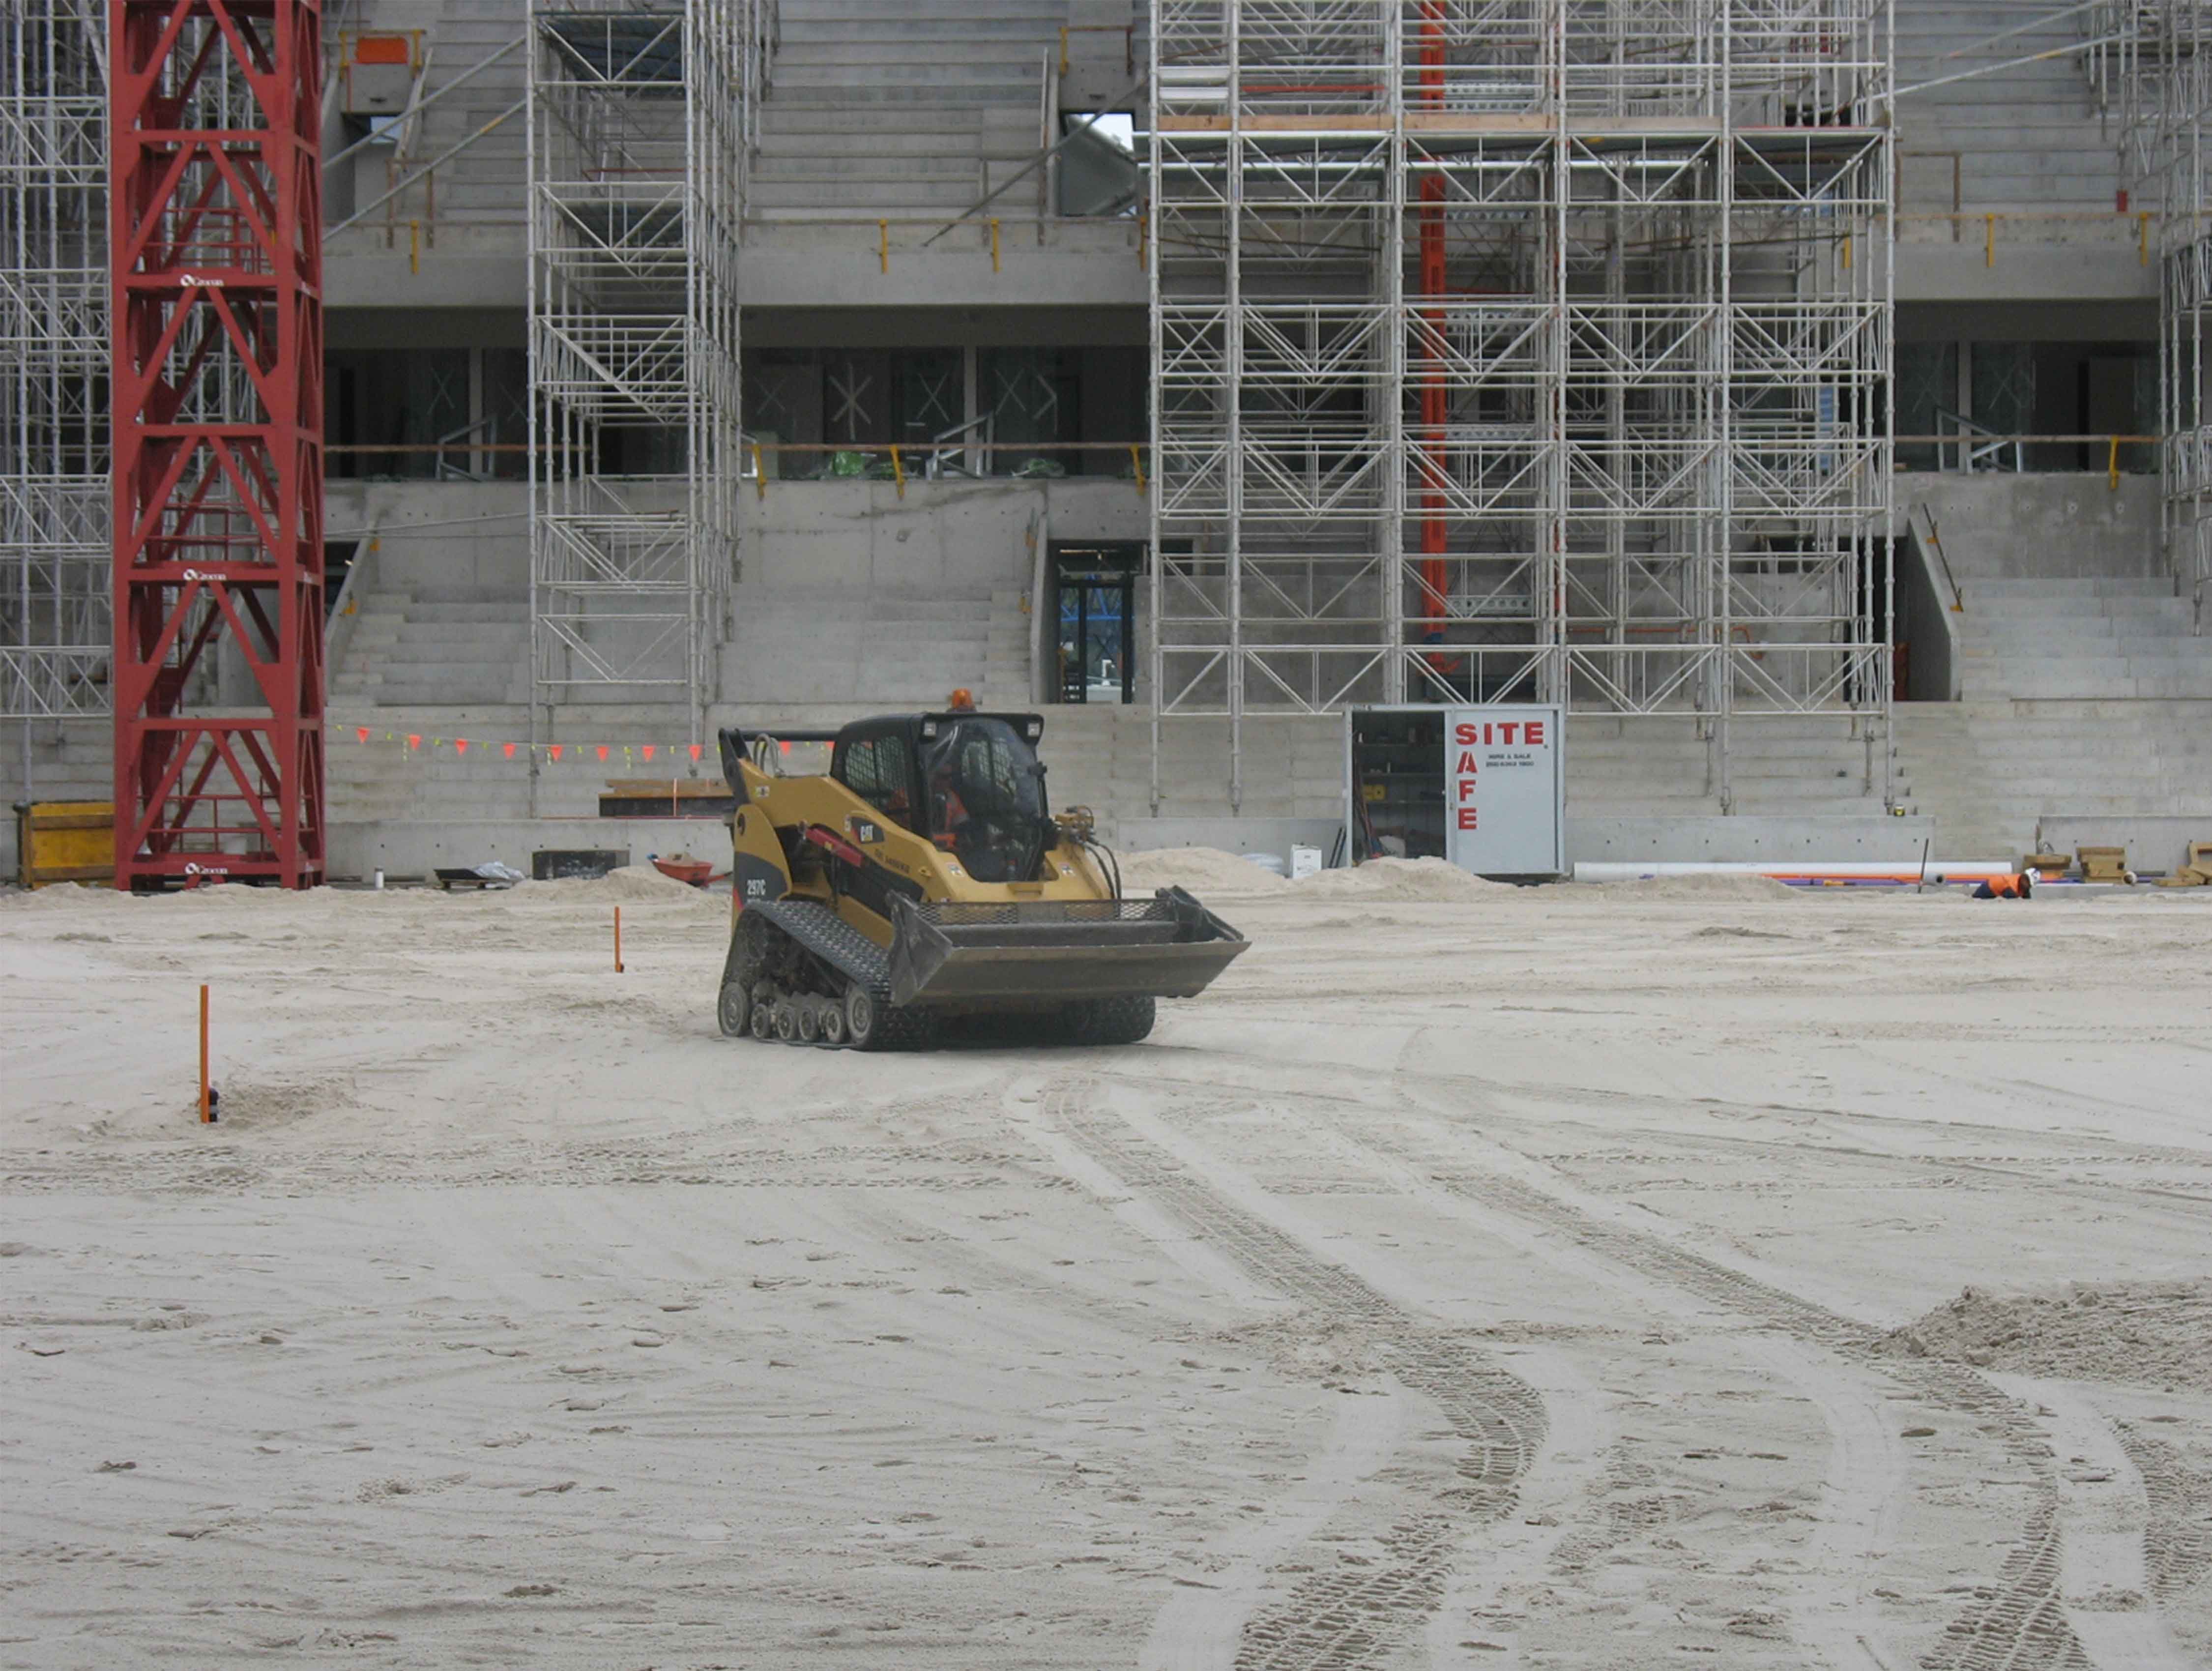 Machinery being drove on a construction site for a stadium sportsfield